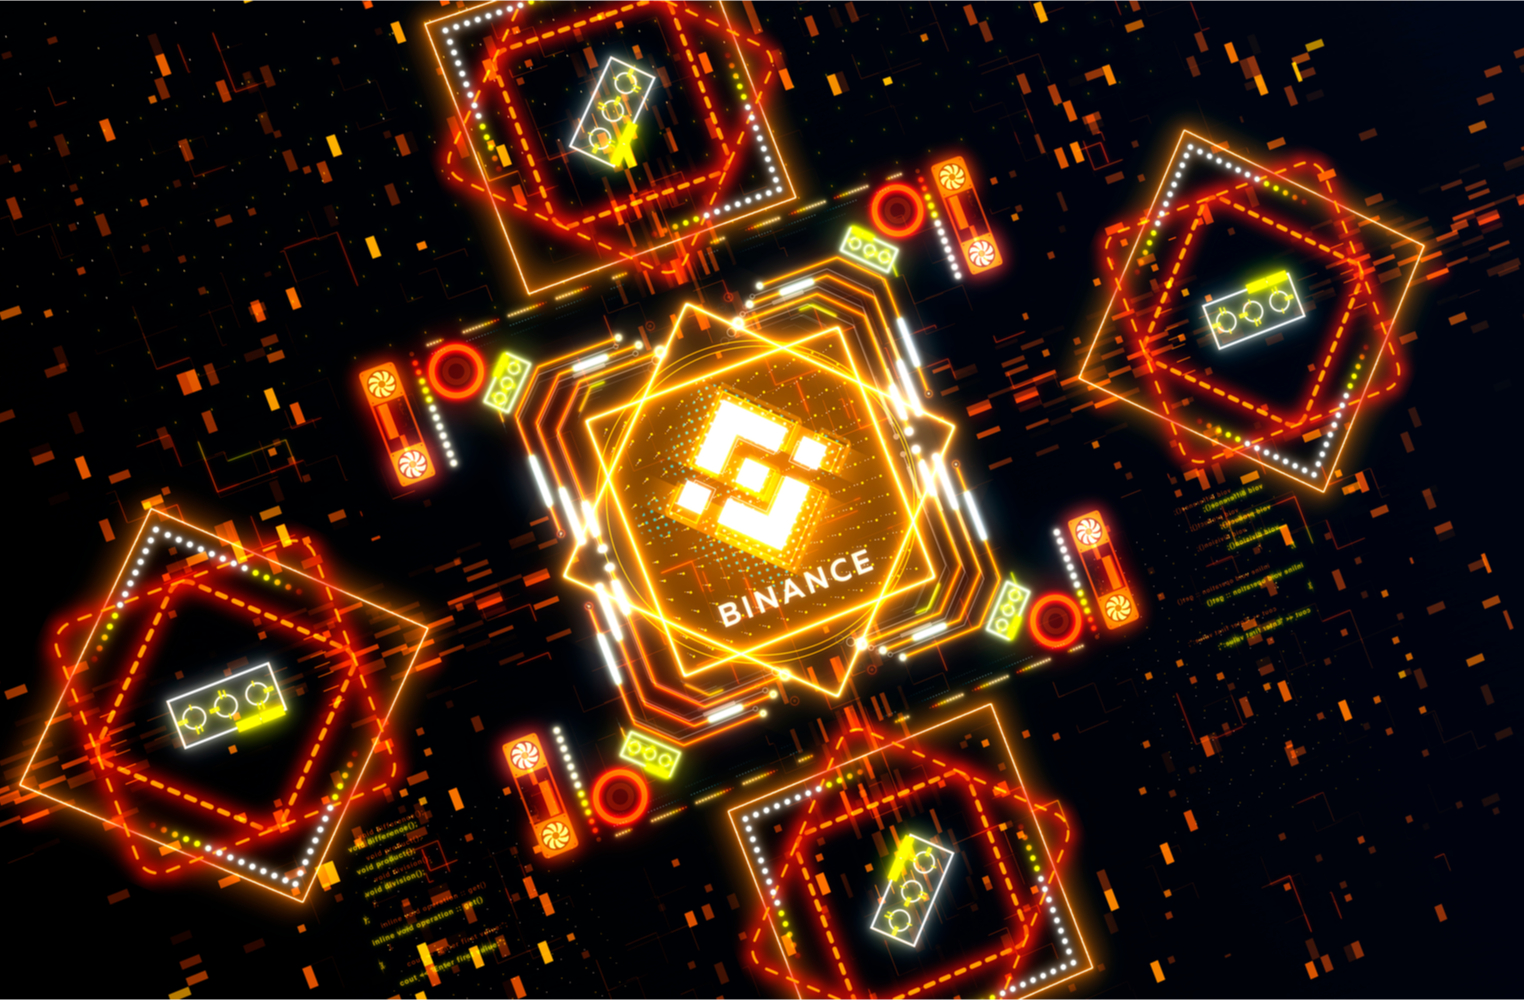 Binance Adds Bitcoin Cash to Its Decentralized Exchange